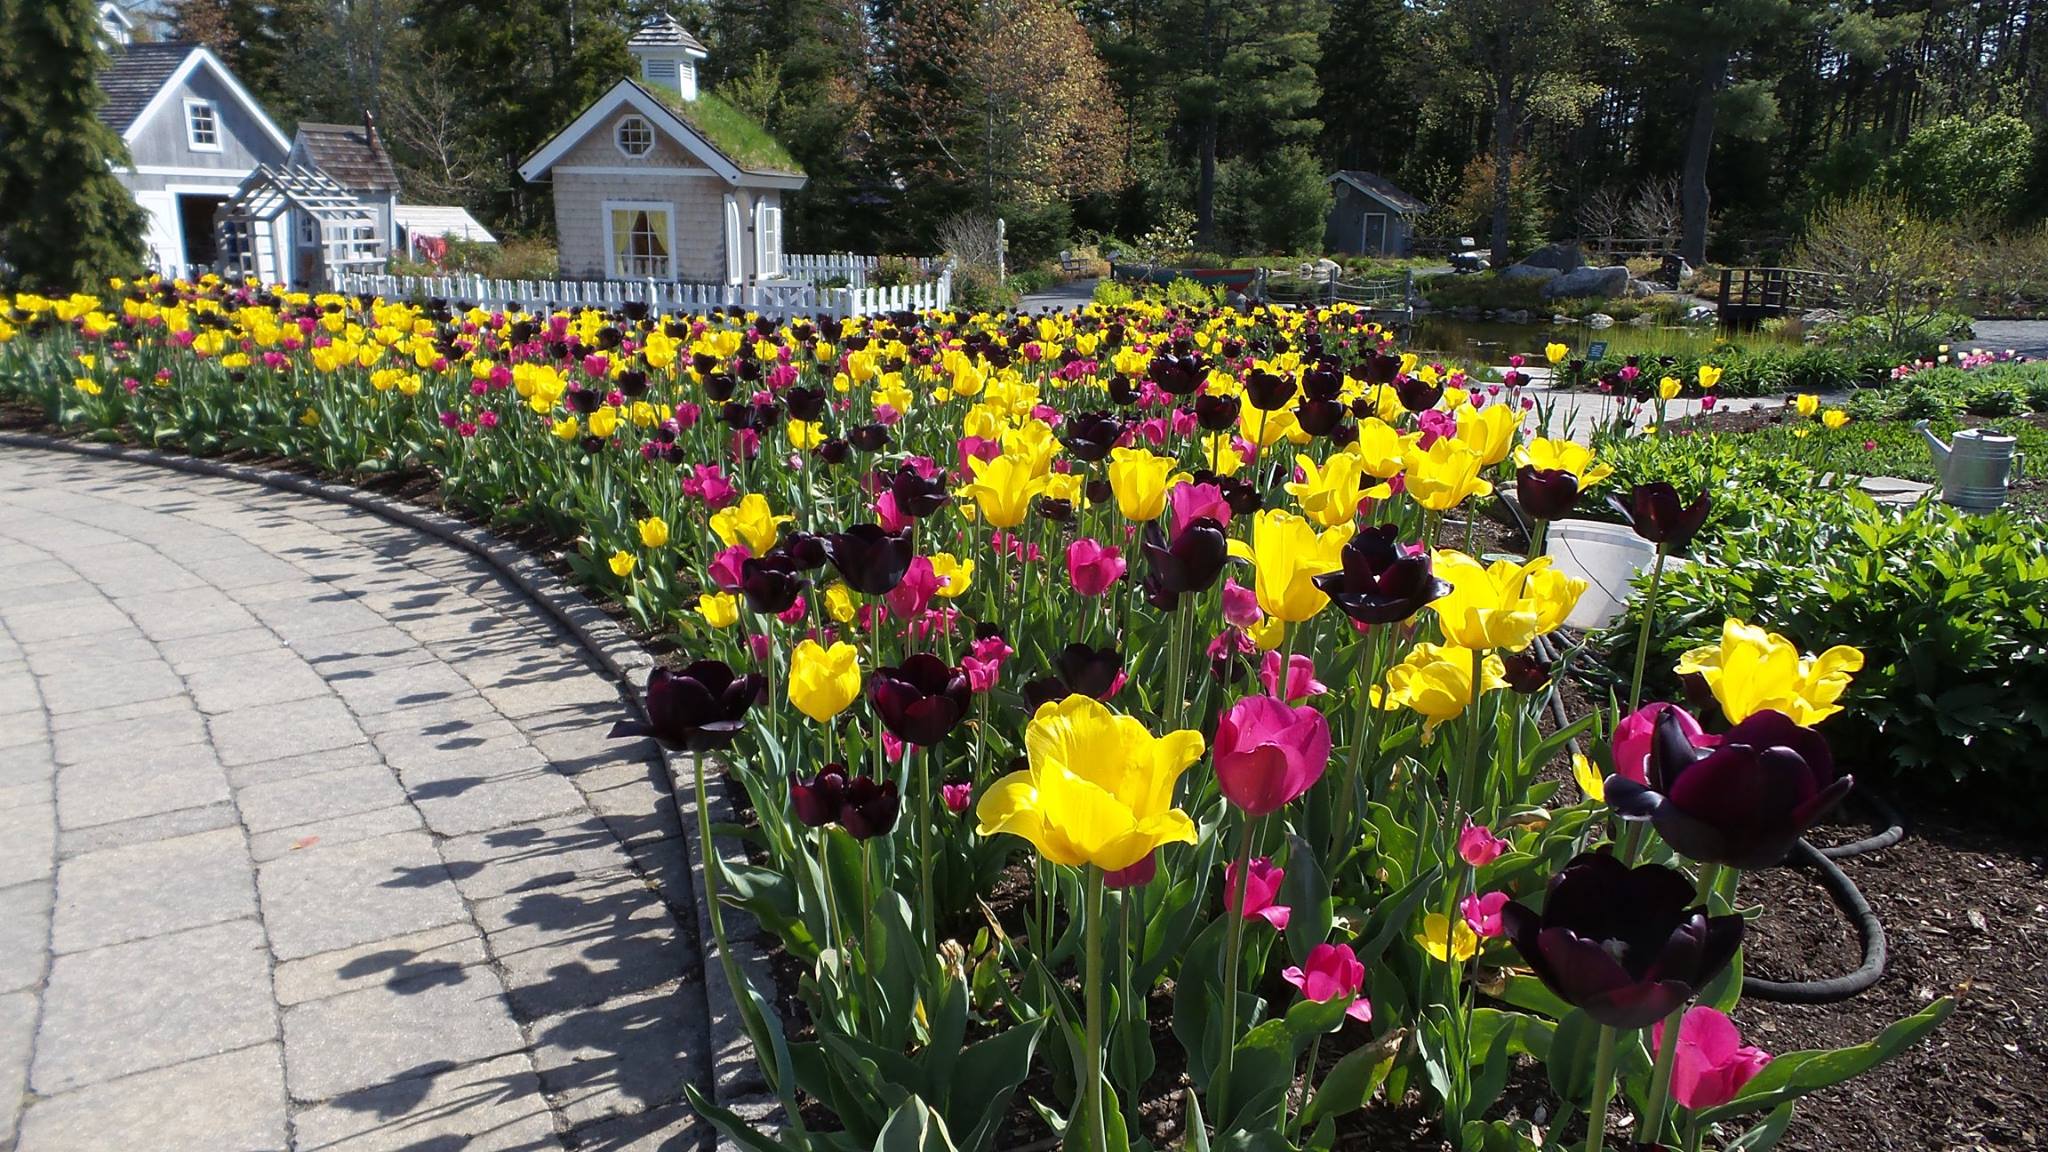 12 great gardens to visit in maine - cooperative extension in